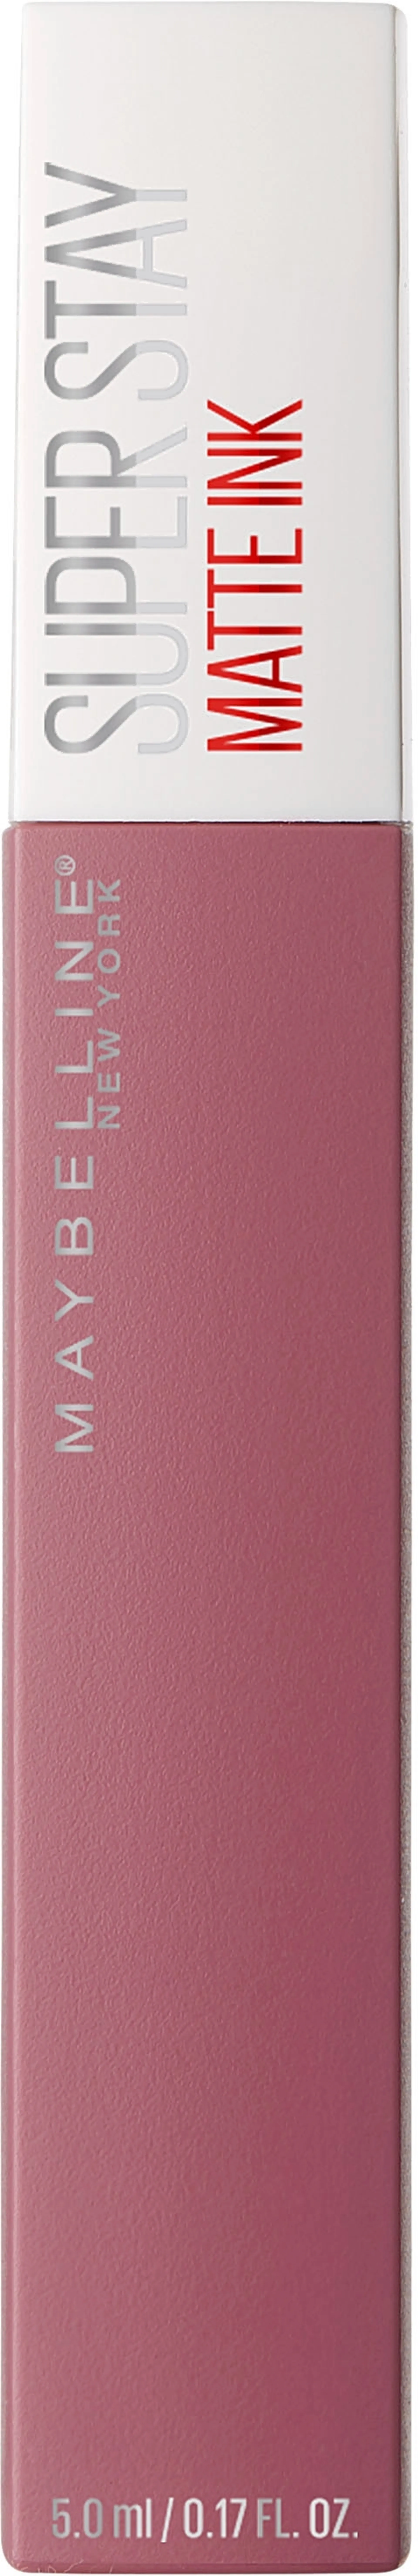 Maybelline New York Super Stay Matte Ink 15 Lover -huulipuna 5ml - 2